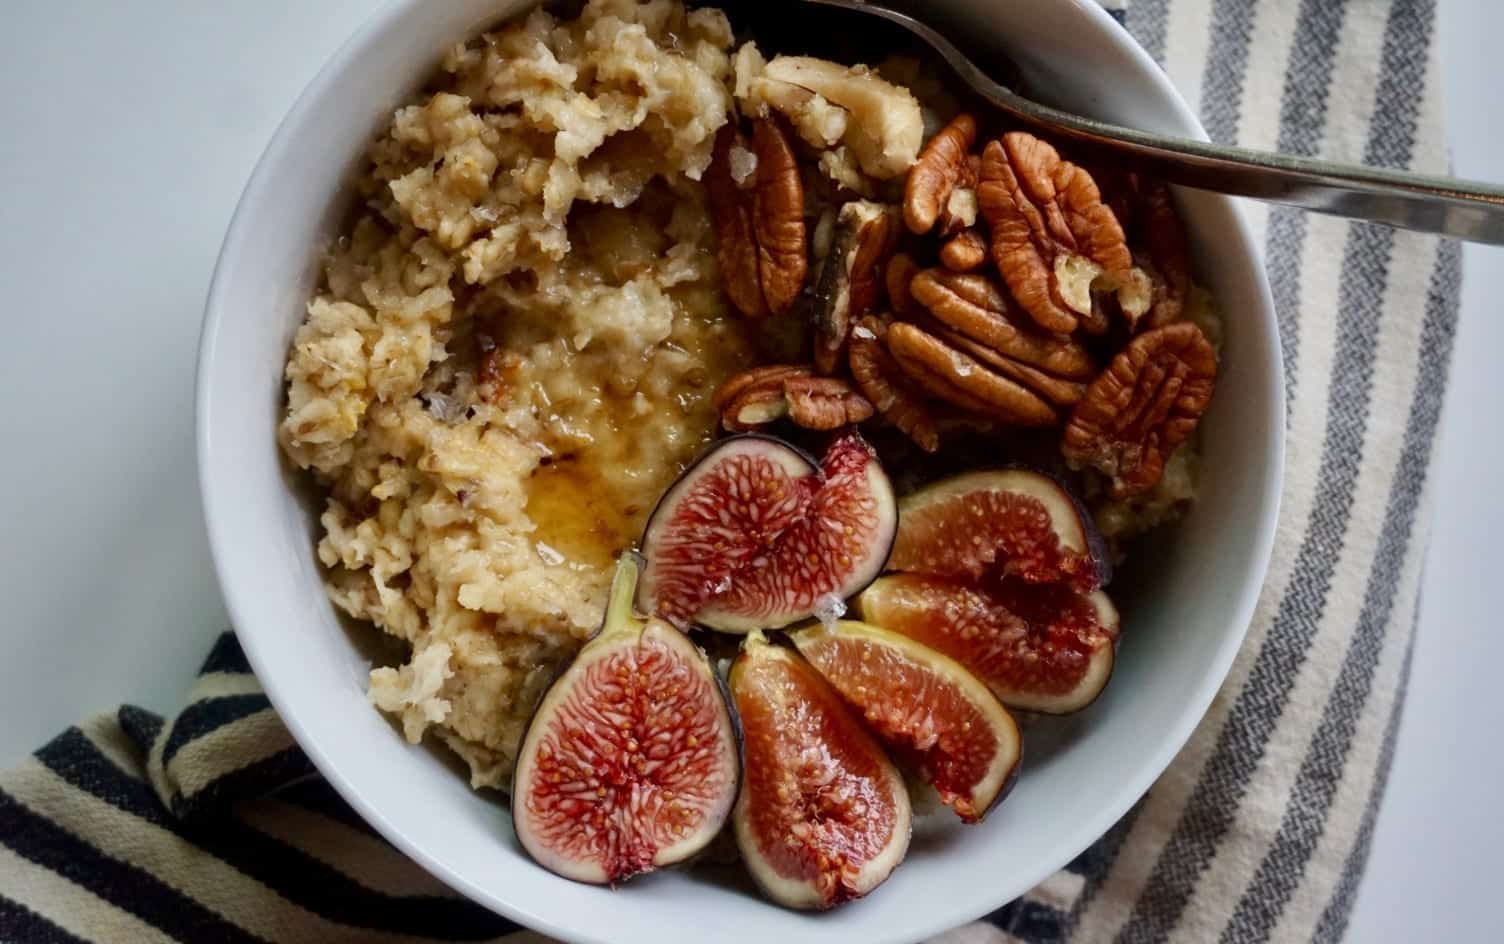 5 Delicious Ways to Use Figs Under 300 MyFitnessPal